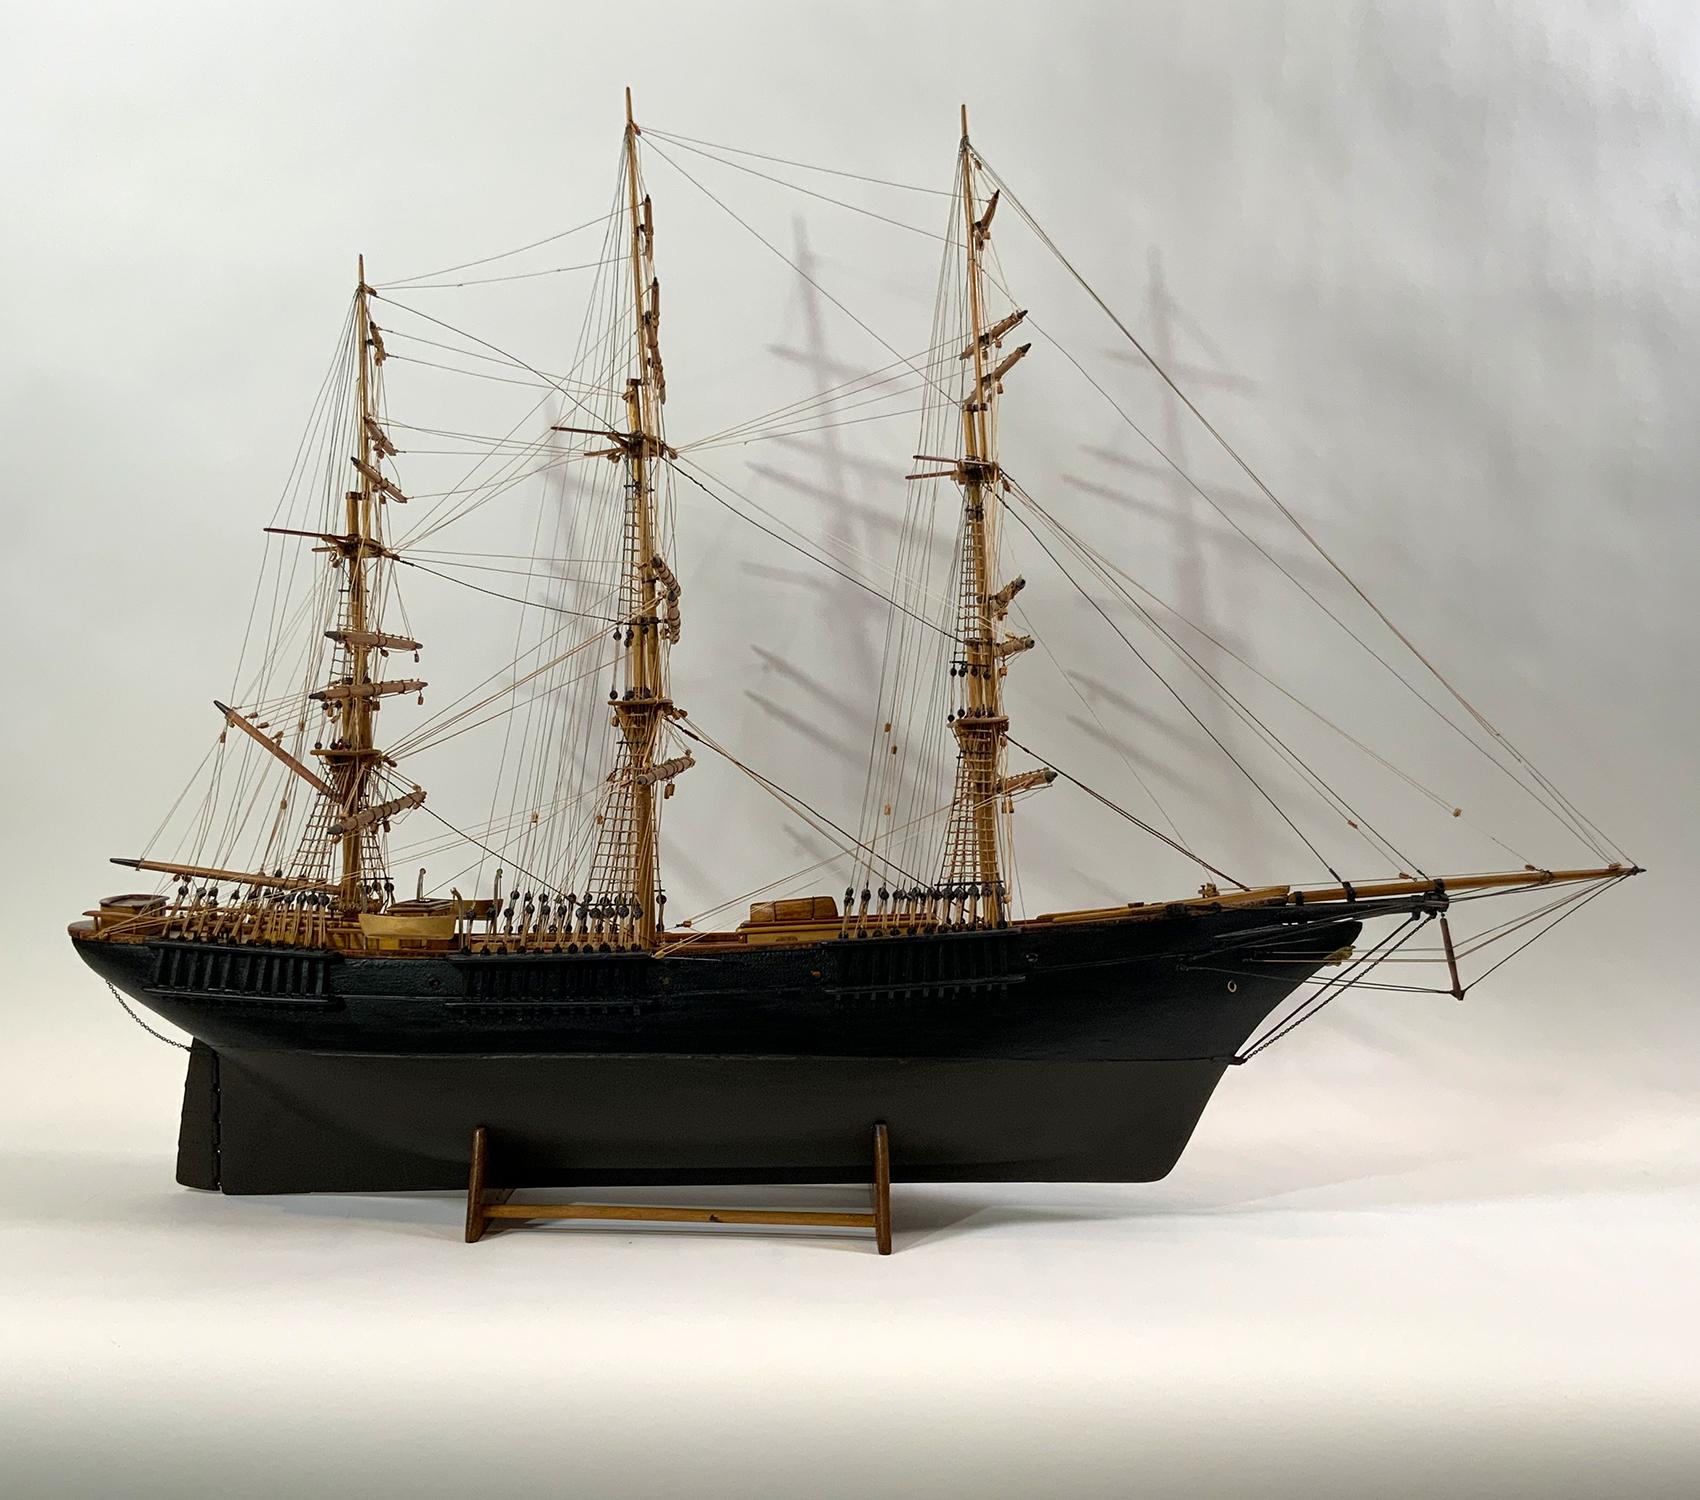 Early Twentieth Century ship model of an American windjammer. Awesome cabin and deck work with varnish finish. Fully rigged with all appropriate cords. Take a look at the quality wood working on the deck and cabins. The running rig cords run to pin